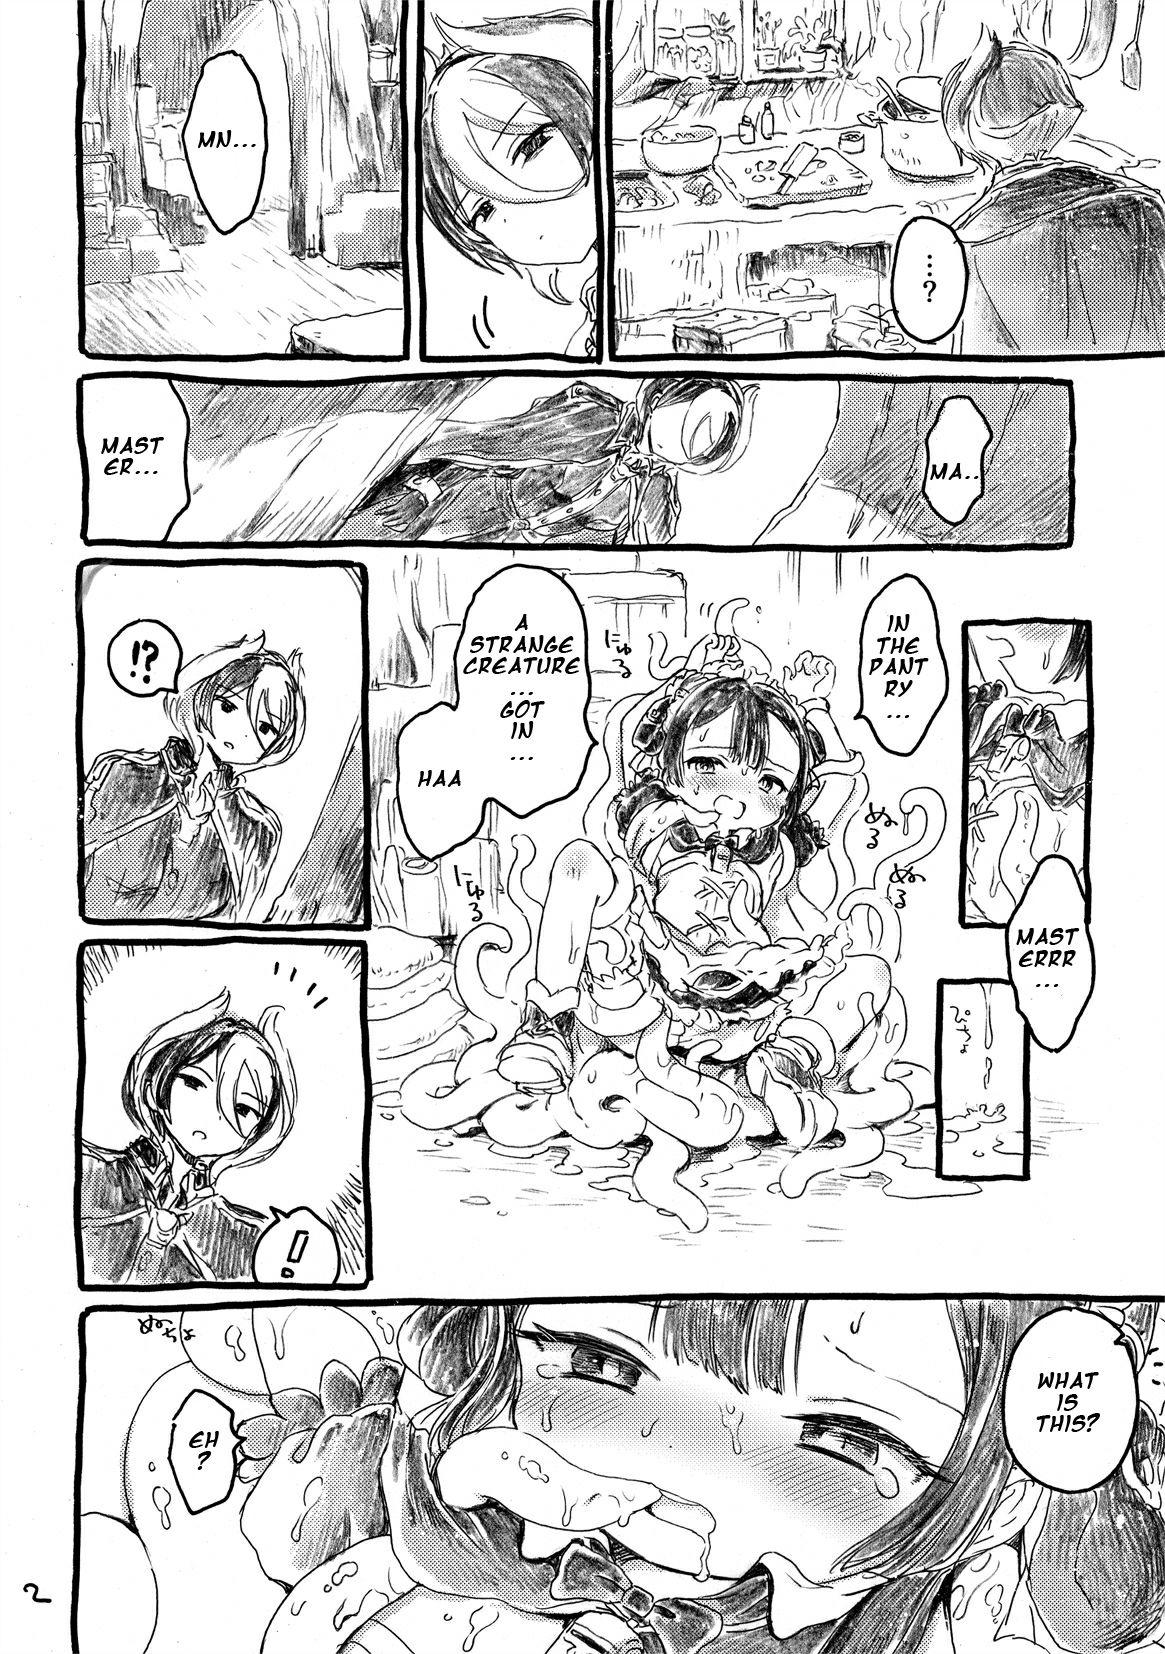 Woman Fucking Fudou Kyou to Marulk no Abyss - Made in abyss Sucking Dick - Page 2